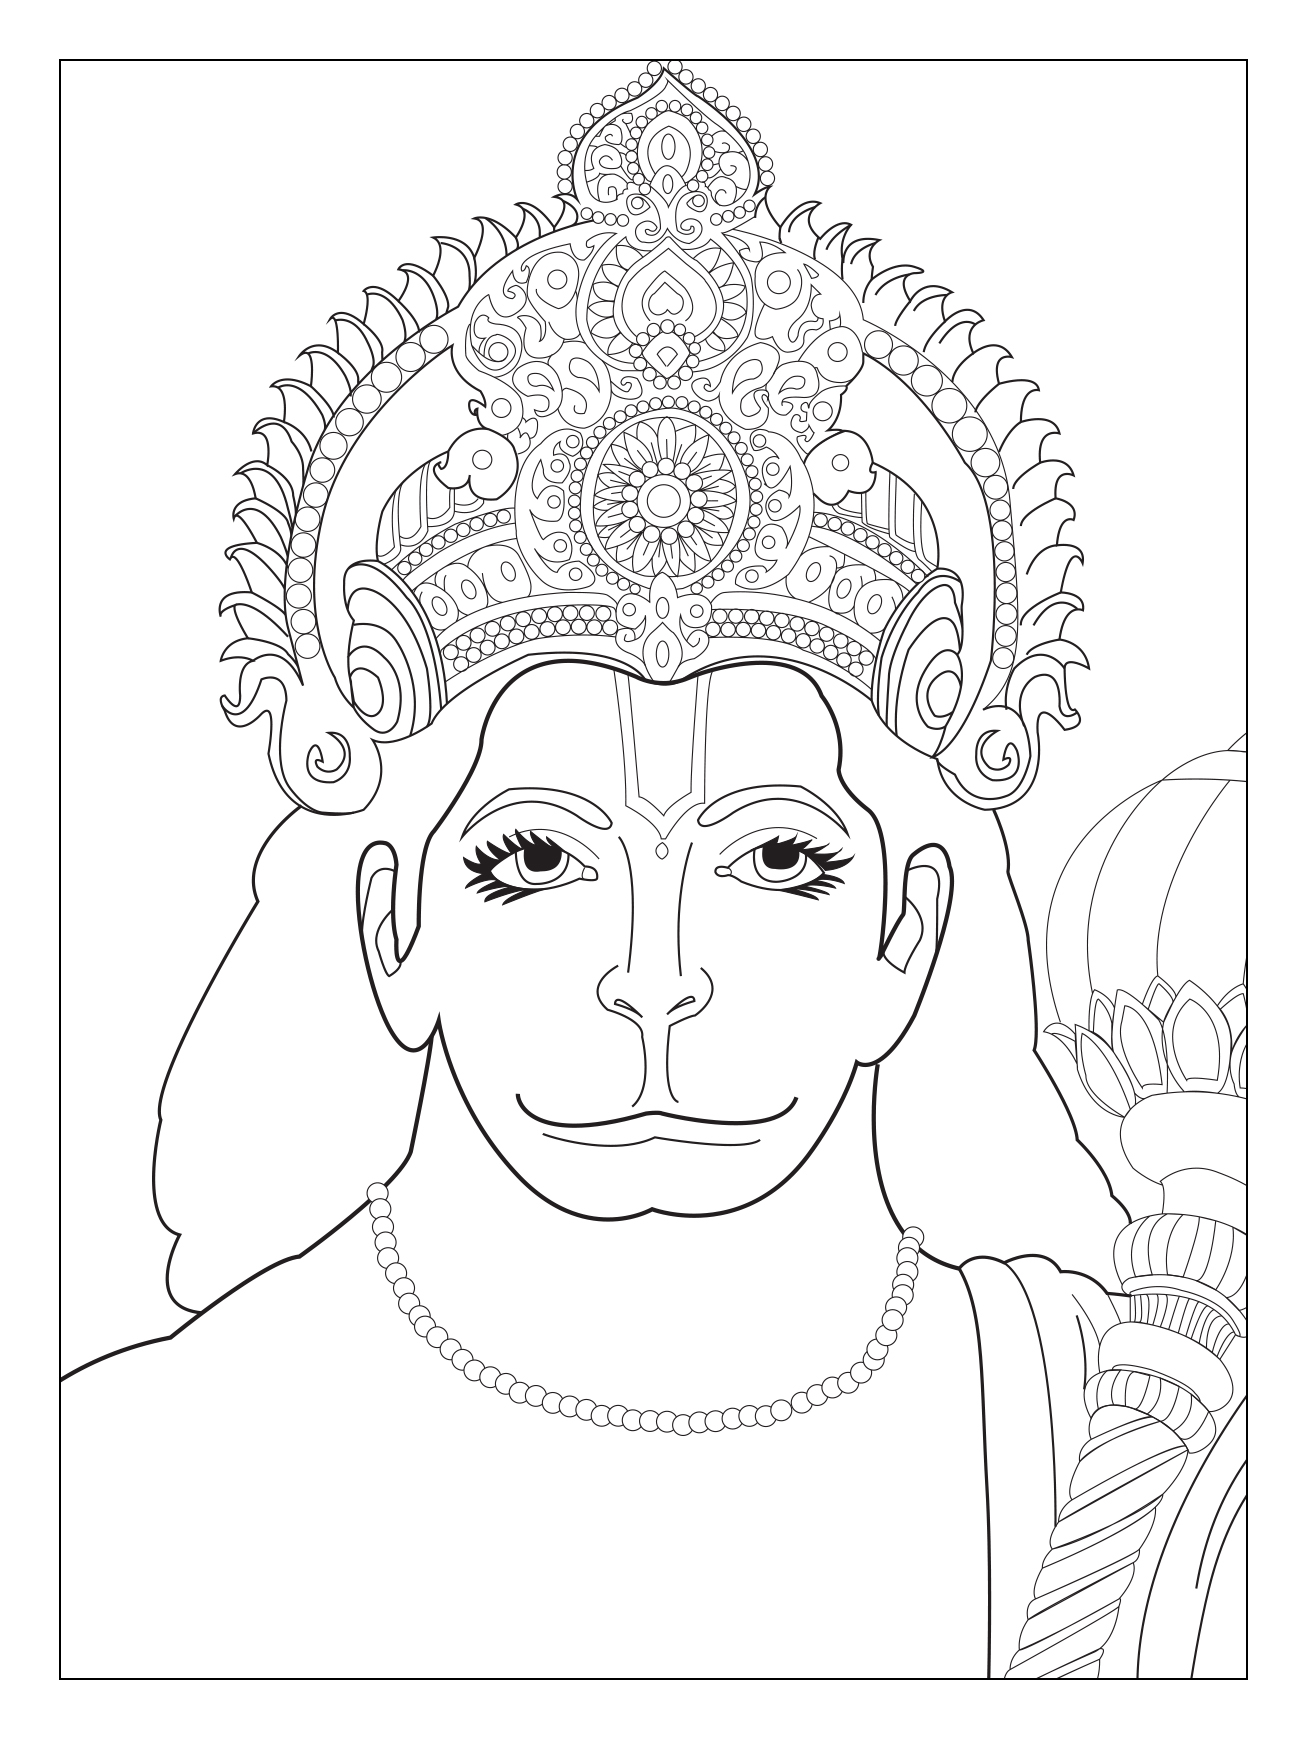 Shiva Coloring Pages at GetColorings.com | Free printable colorings